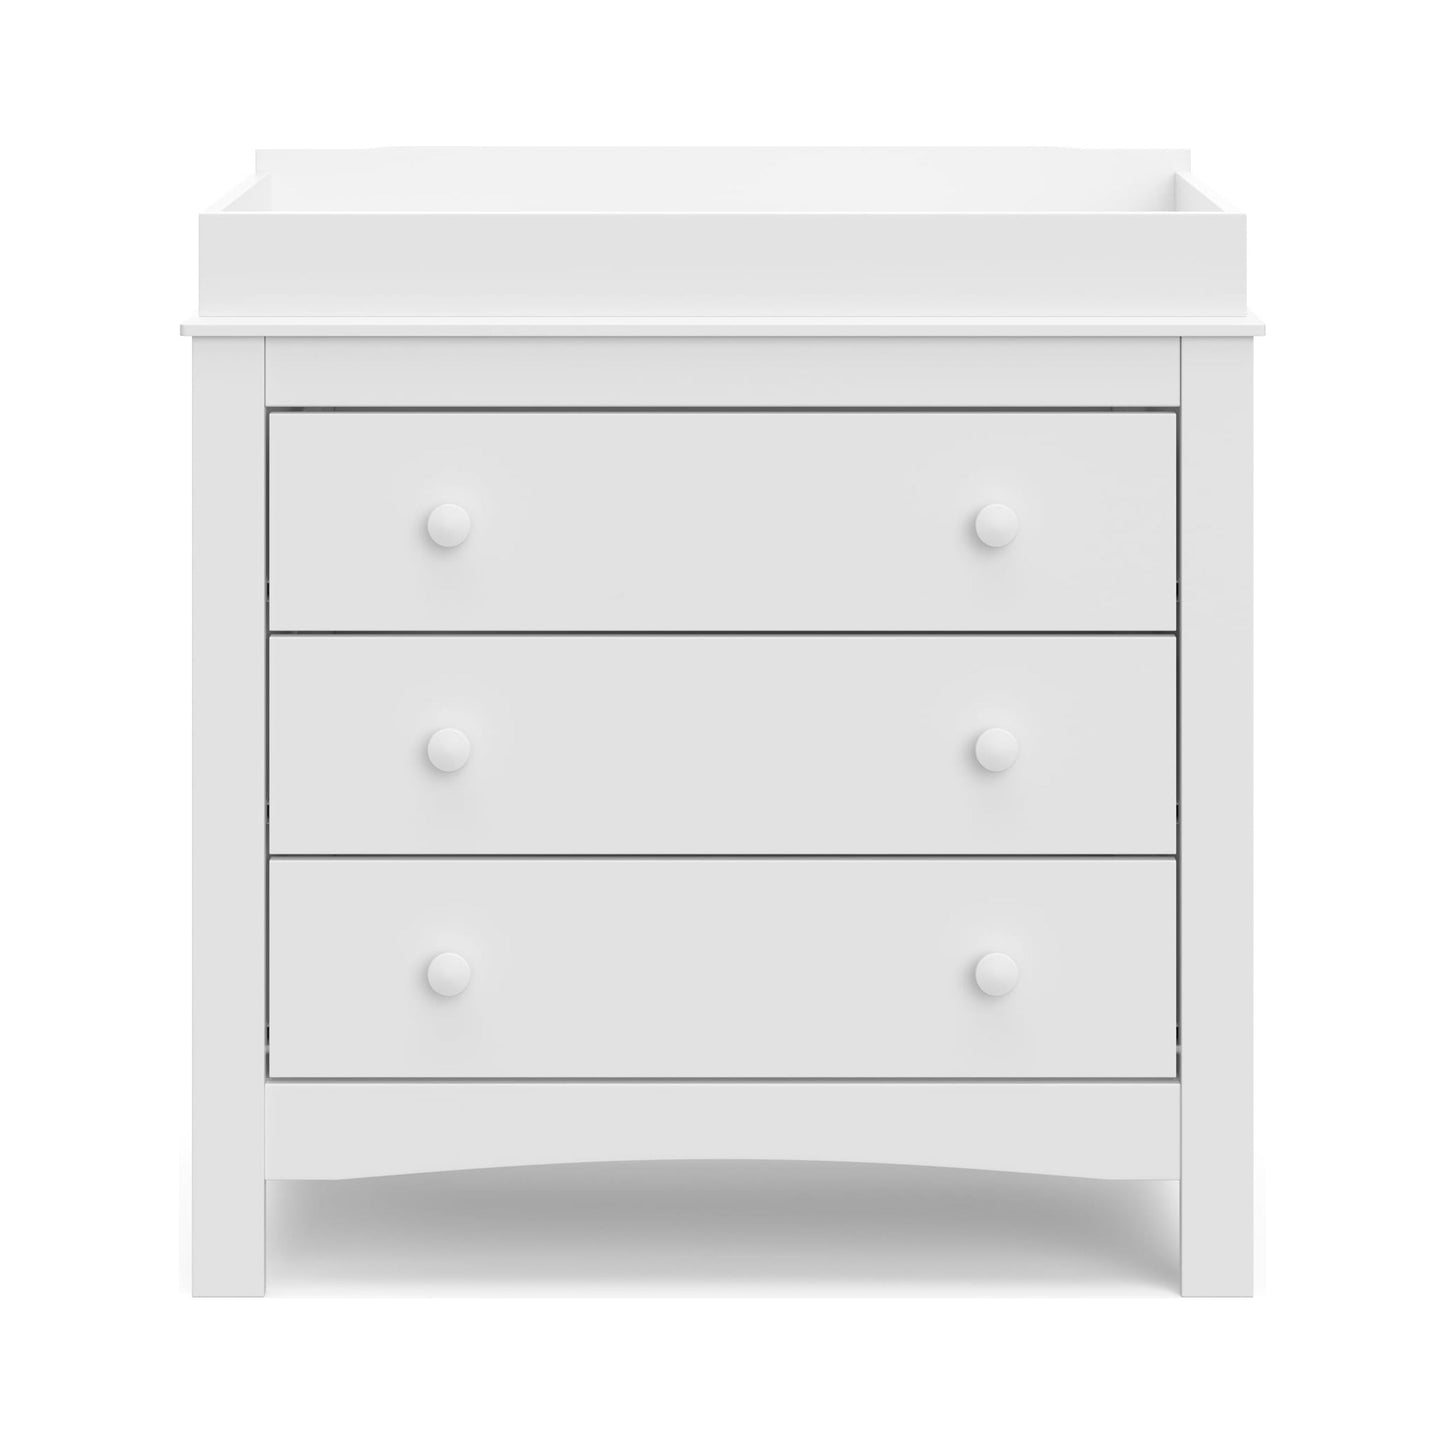 Graco Noah 3 Drawer Diaper Changing Table Dresser by Graco, White